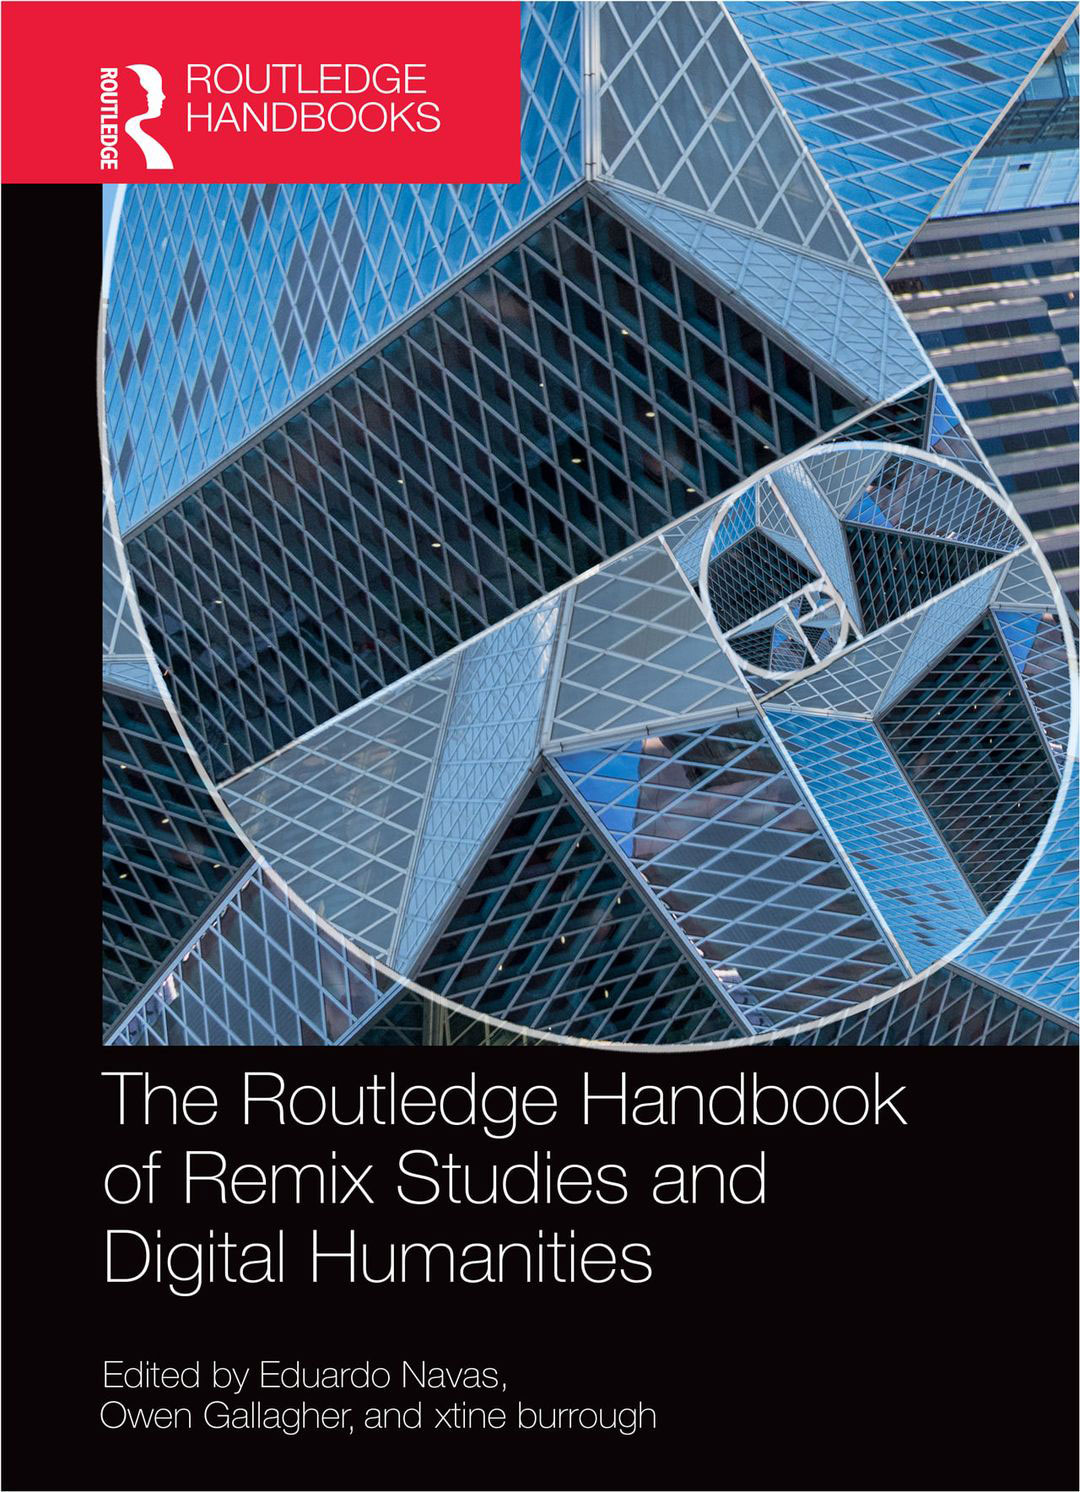 The Routledge Handbook of Remix Studies and Digital Humanities, Edited by Eduardo Navas, Owen Gallagher, and xtine burrough